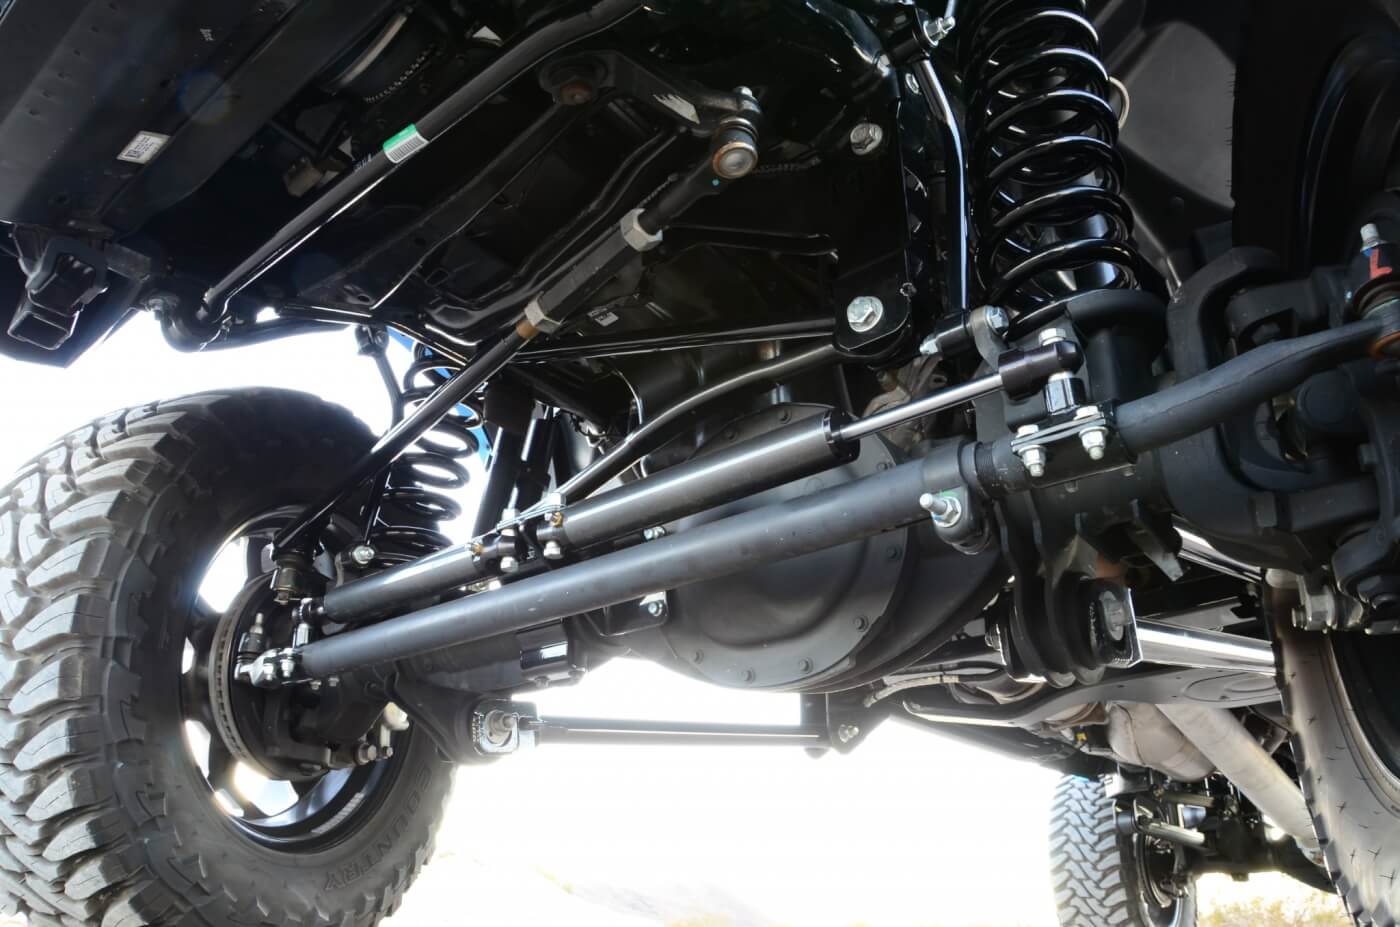 Cross-over steering relocates the mounting above the knuckle, and dual steering stabilizers keep those big Toyo tires tracking straight and true.